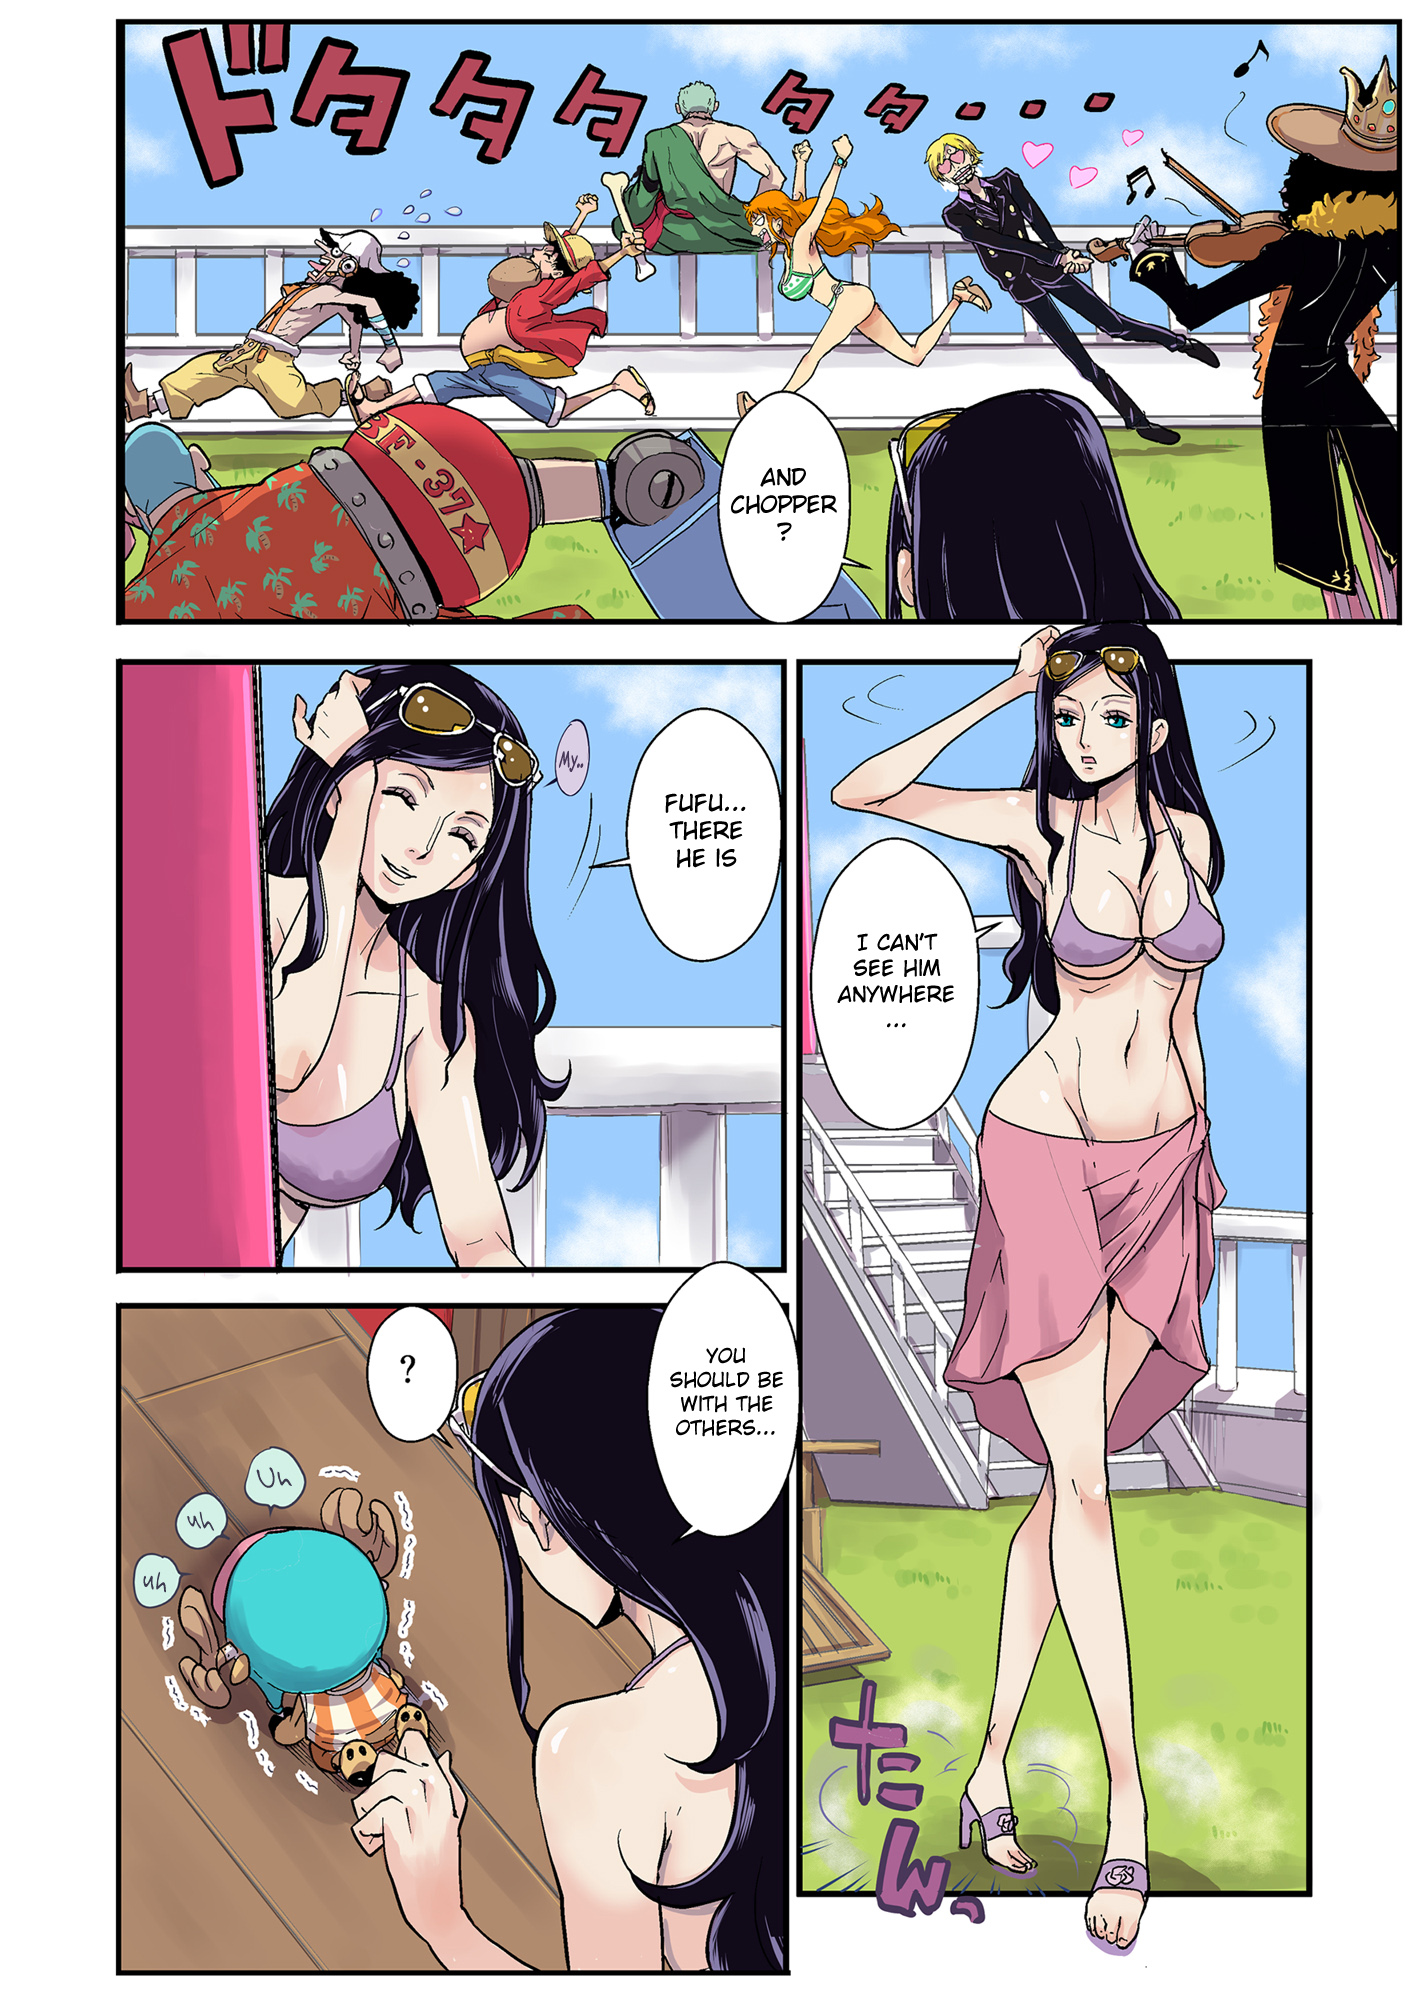 The Most Provocative One Piece Robin Hentai Comics You'll Ever See